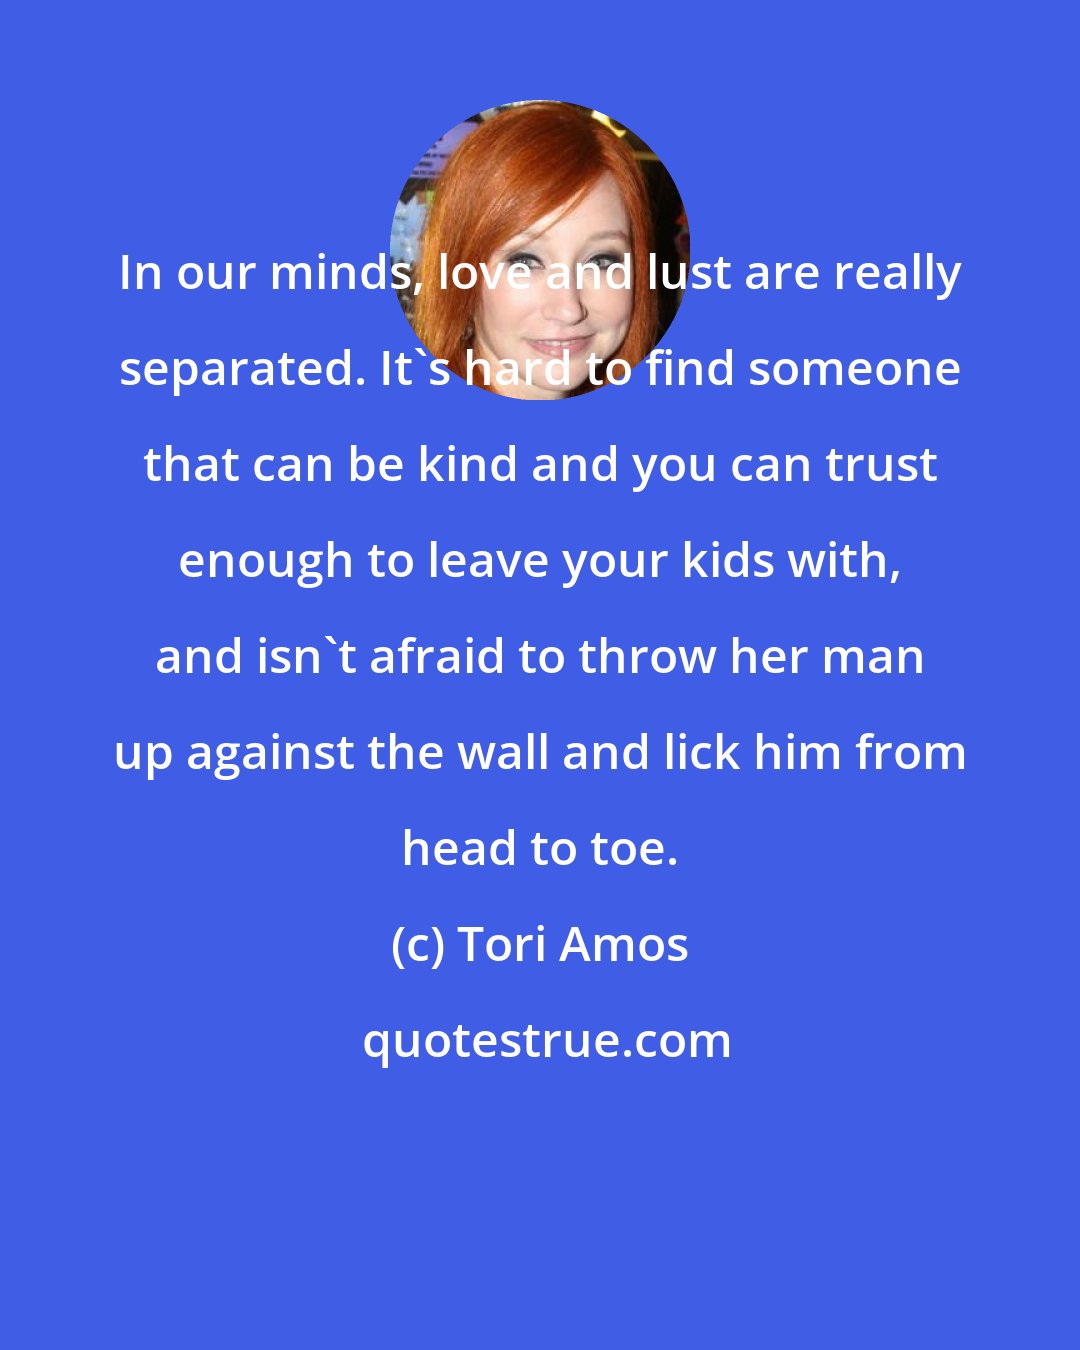 Tori Amos: In our minds, love and lust are really separated. It's hard to find someone that can be kind and you can trust enough to leave your kids with, and isn't afraid to throw her man up against the wall and lick him from head to toe.